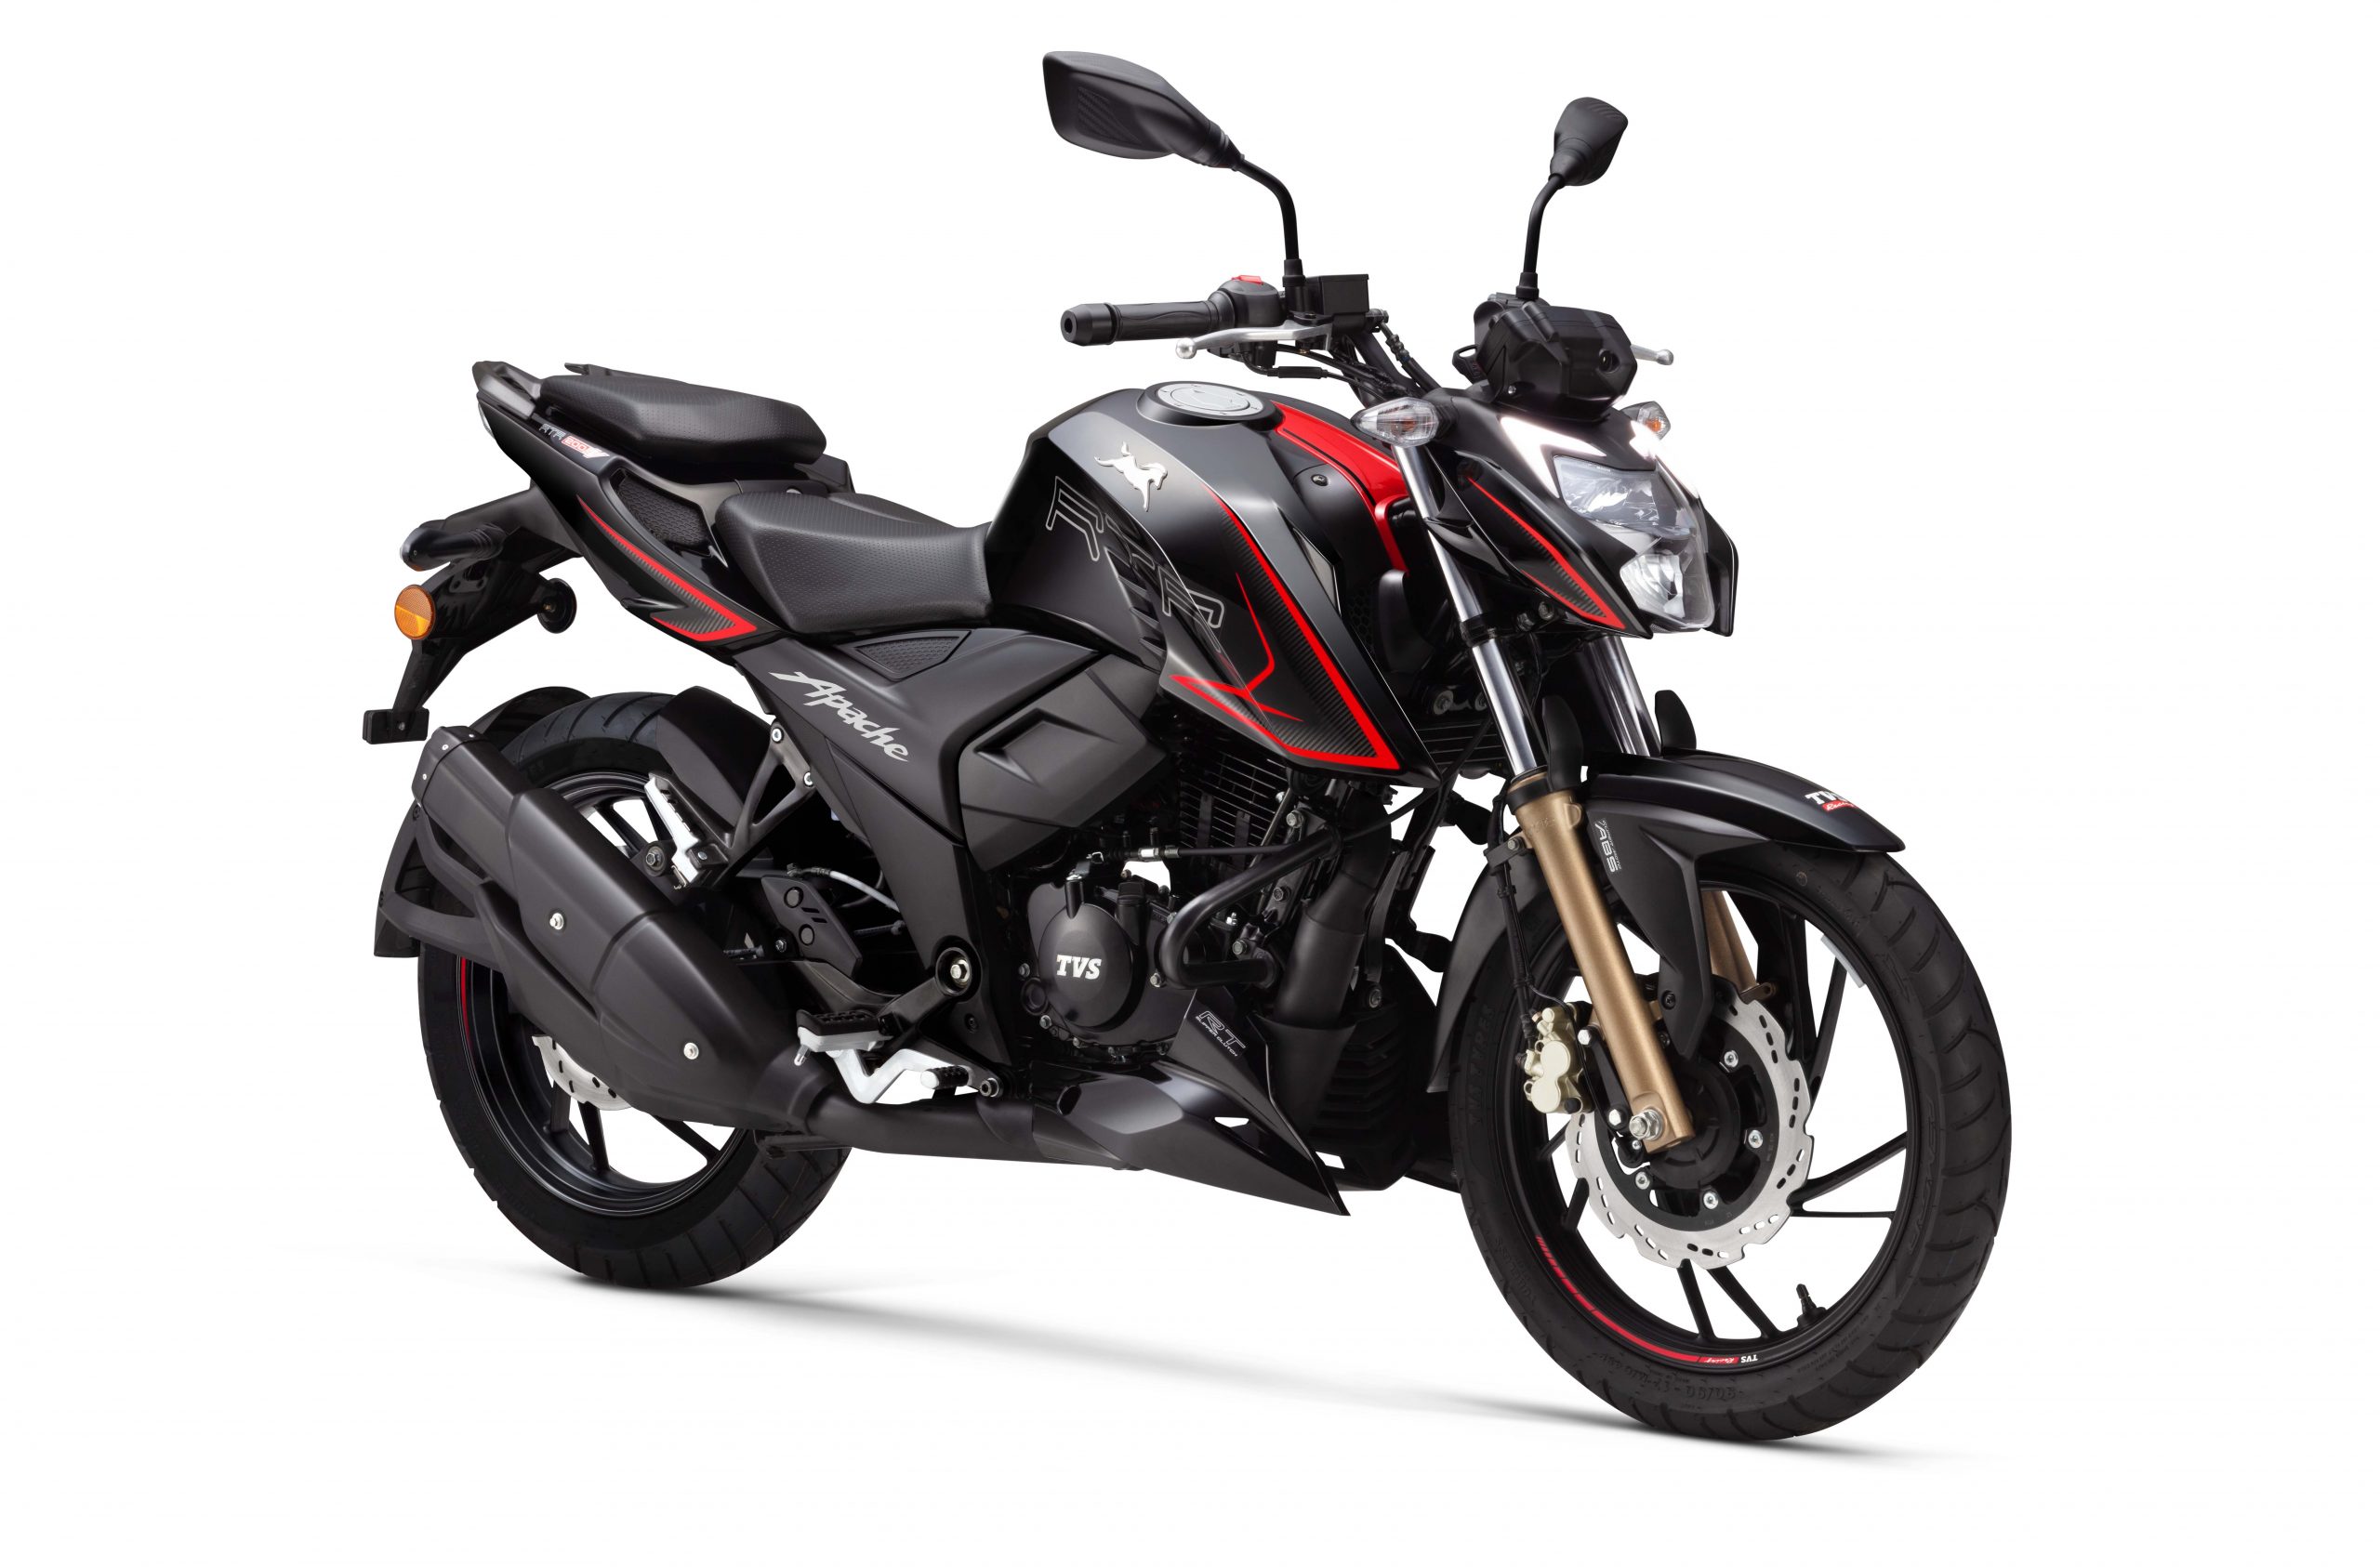 TVS Motor launches Apache RTR 200 4V with Super-Moto ABS at Rs 1.23 lakh